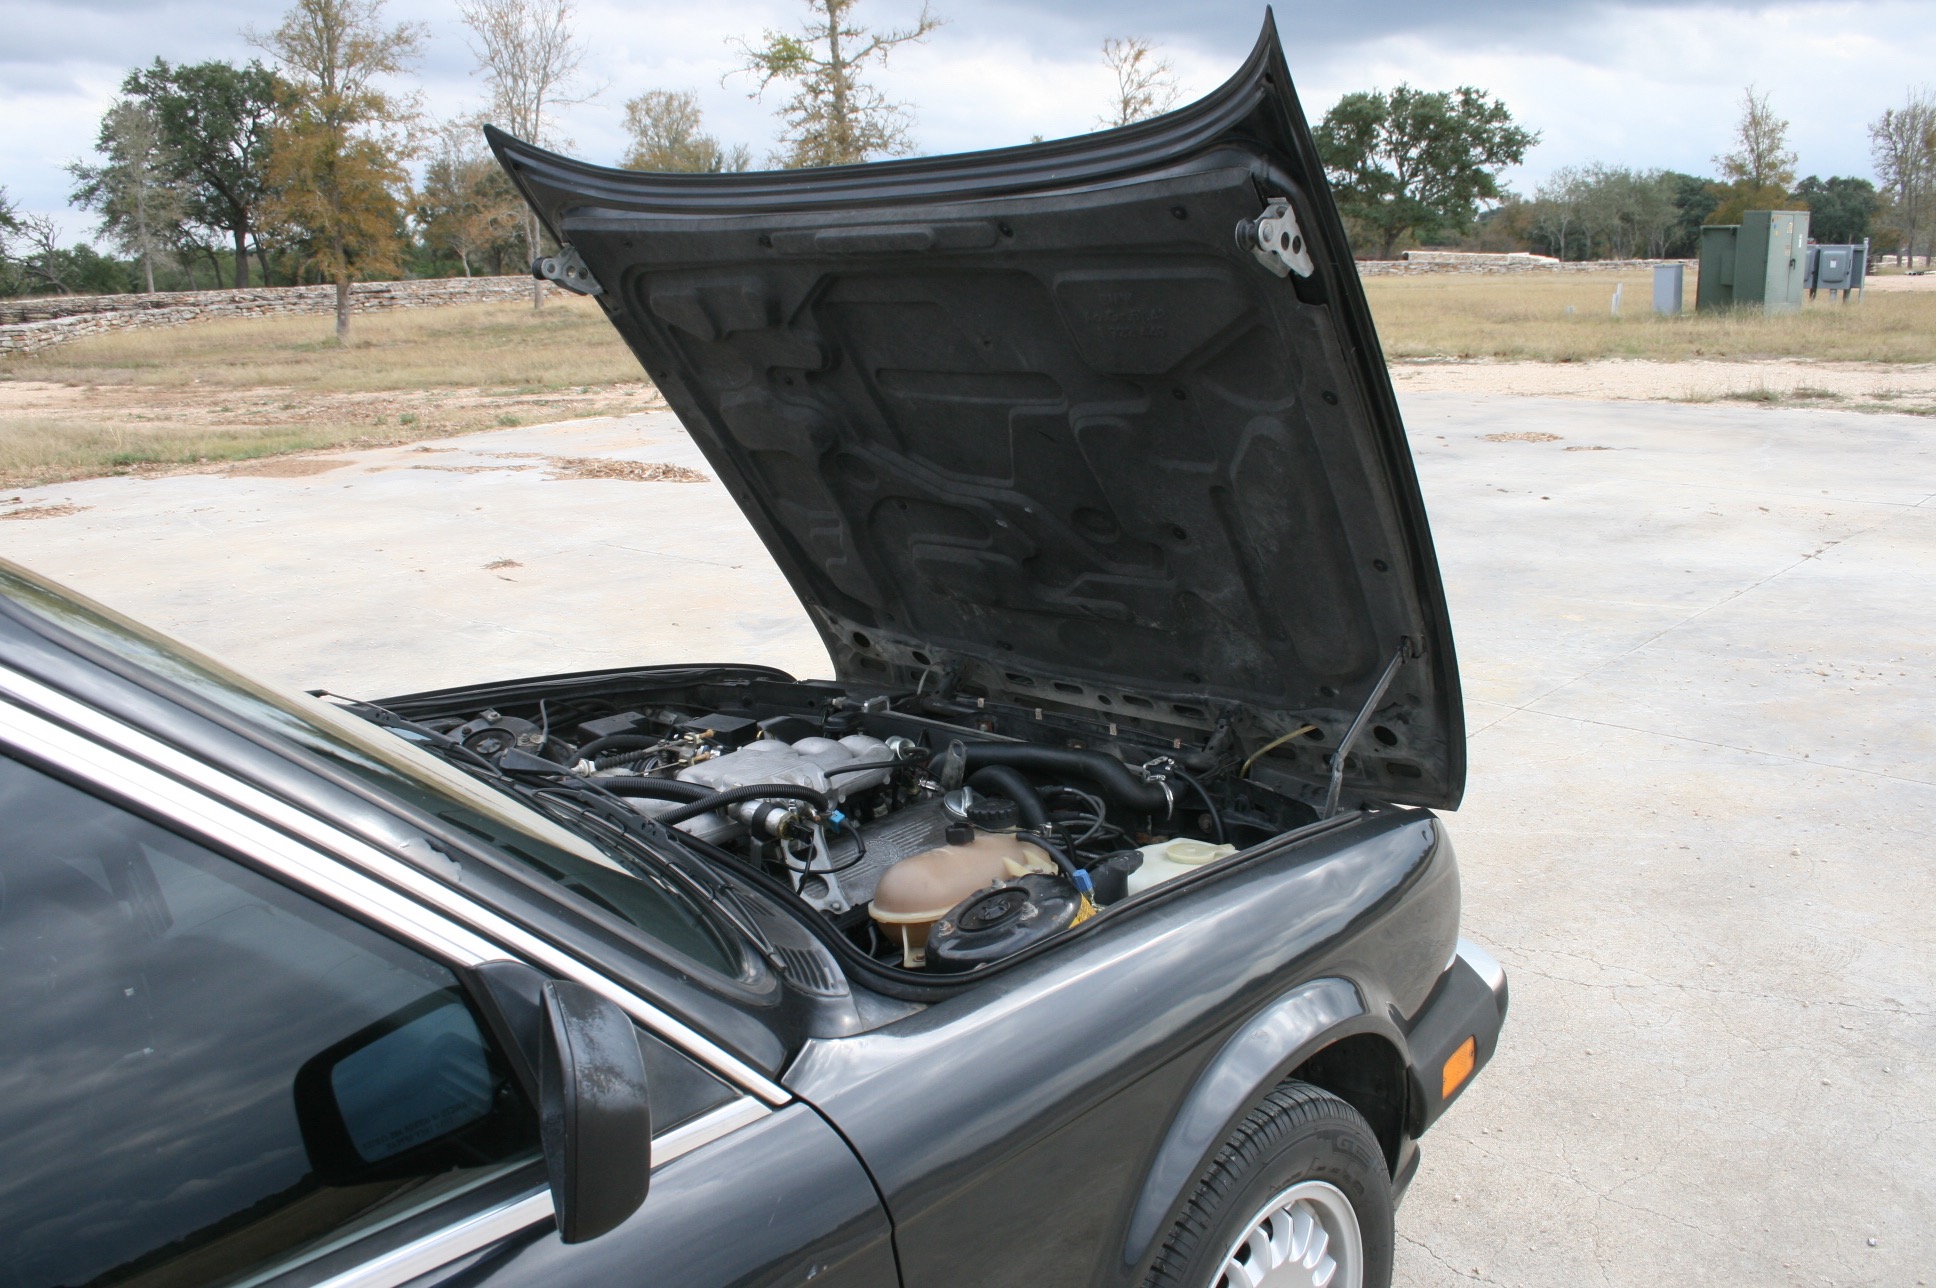 What It’s Like To Live With BMW’s Most Unloved Engine